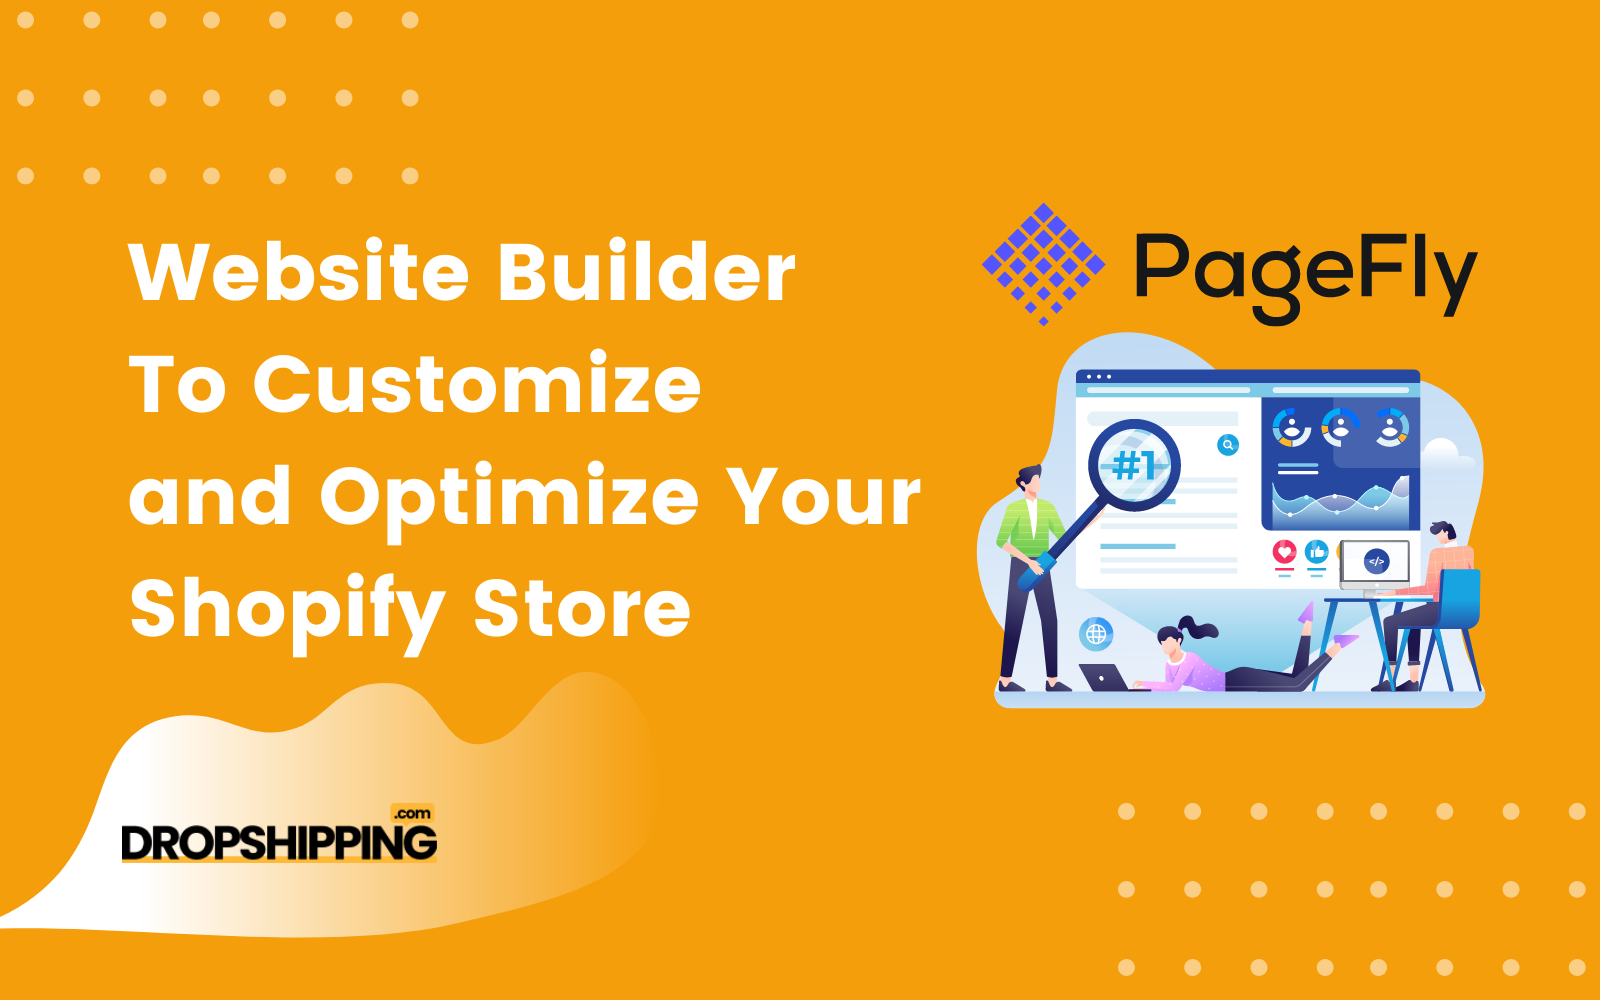 PageFly Review: Website Builder To Customize and Optimize Your Shopify Stores